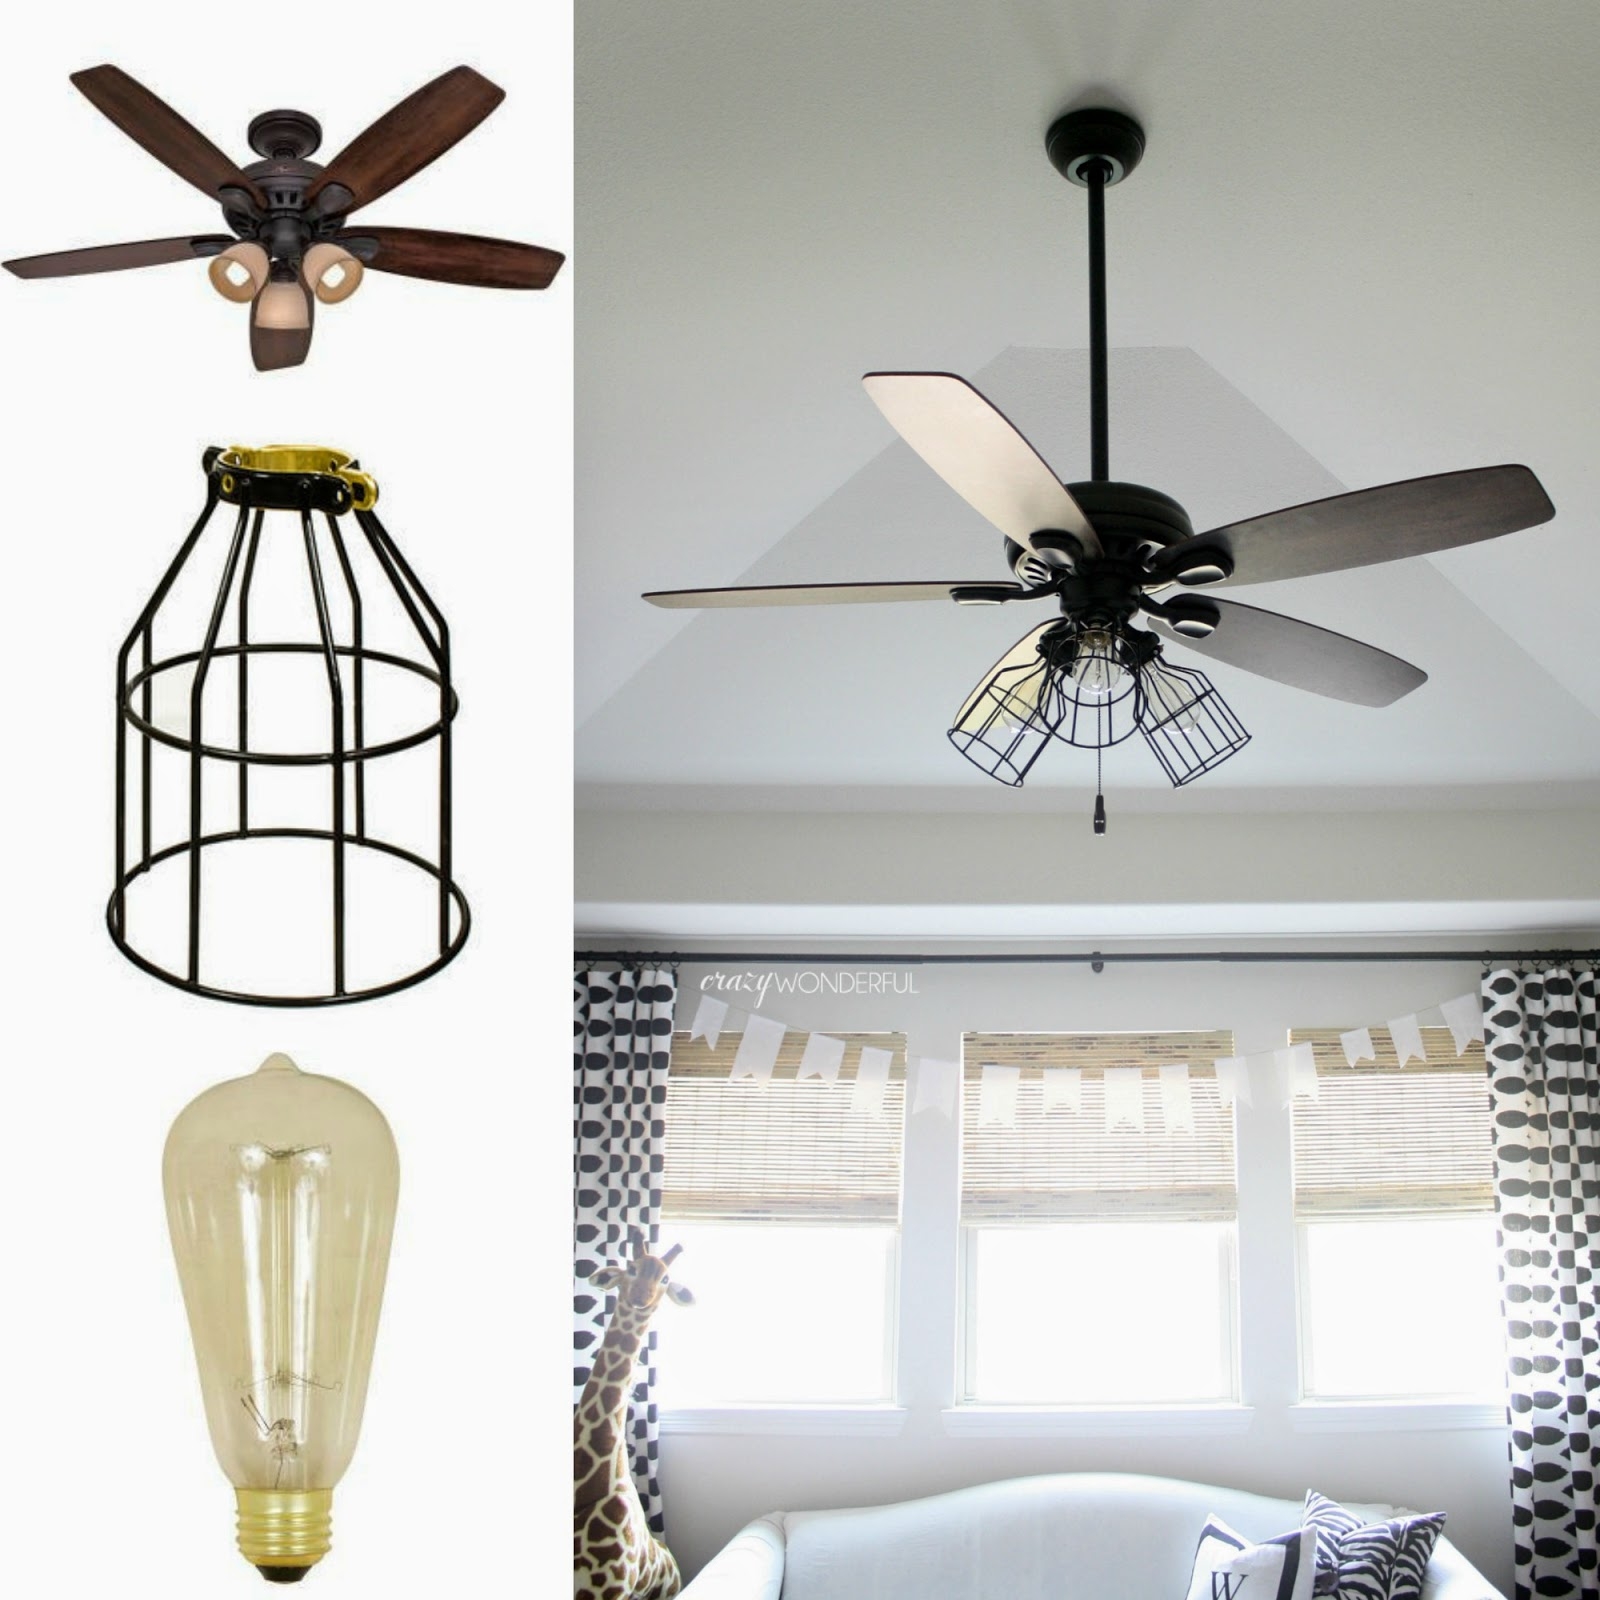 Permalink to Ceiling Fans With Coordinating Light Fixtures